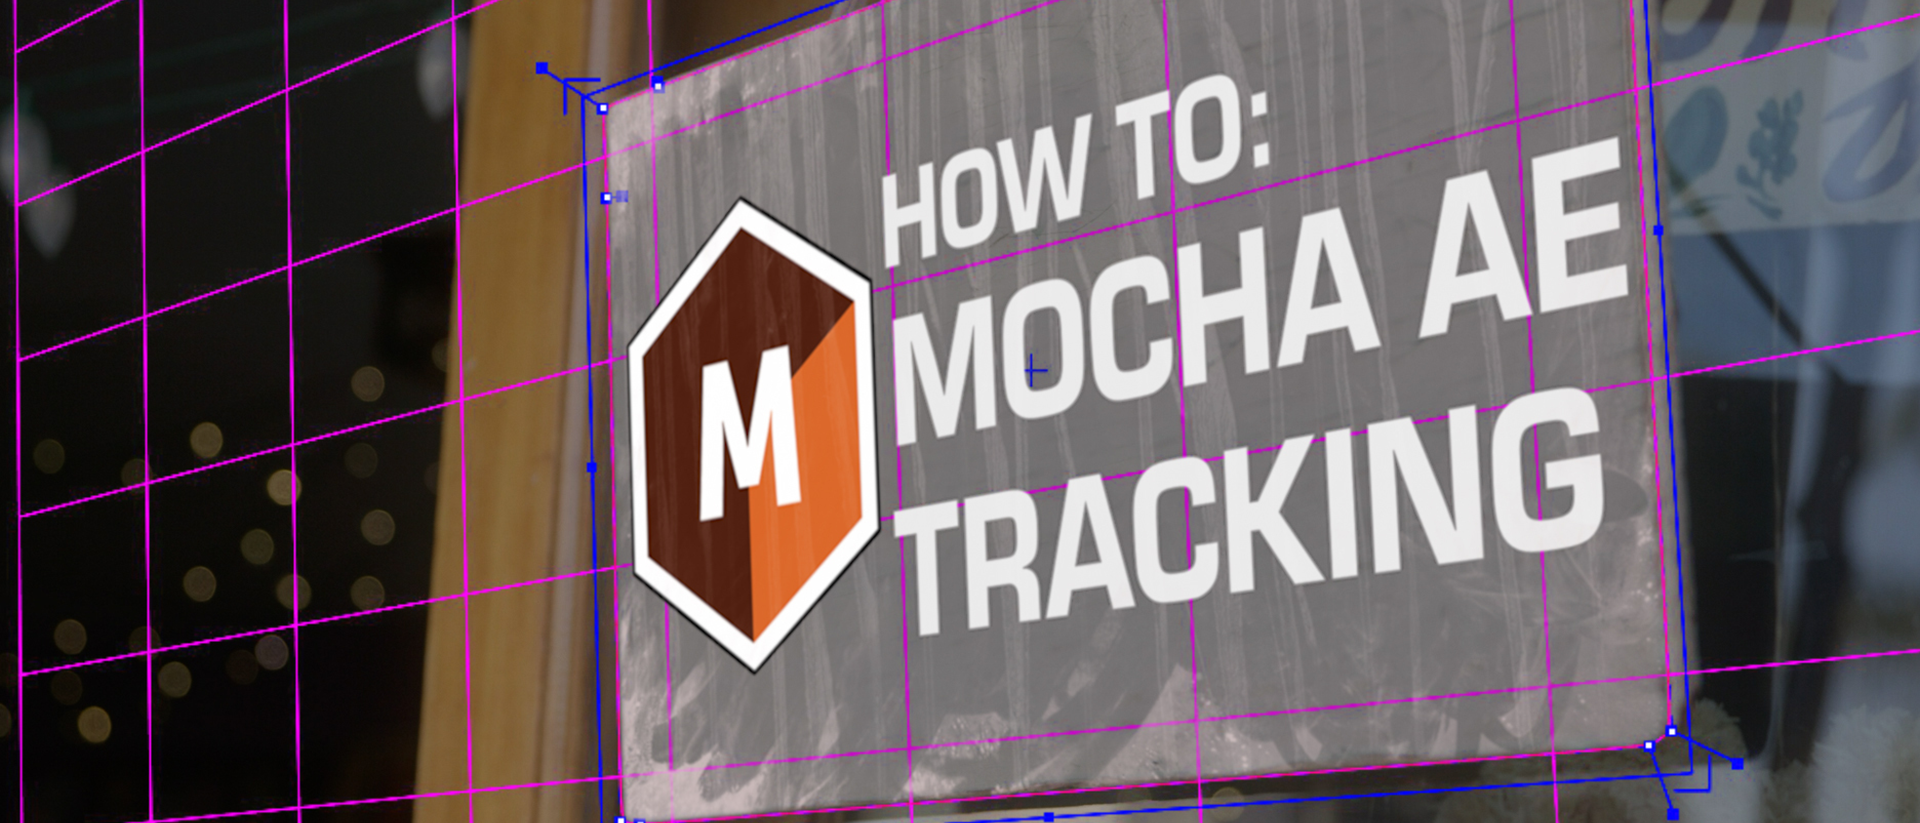 How To Do Motion Tracking with Mocha AE | Beginner-Friendly After Effects Tutorial